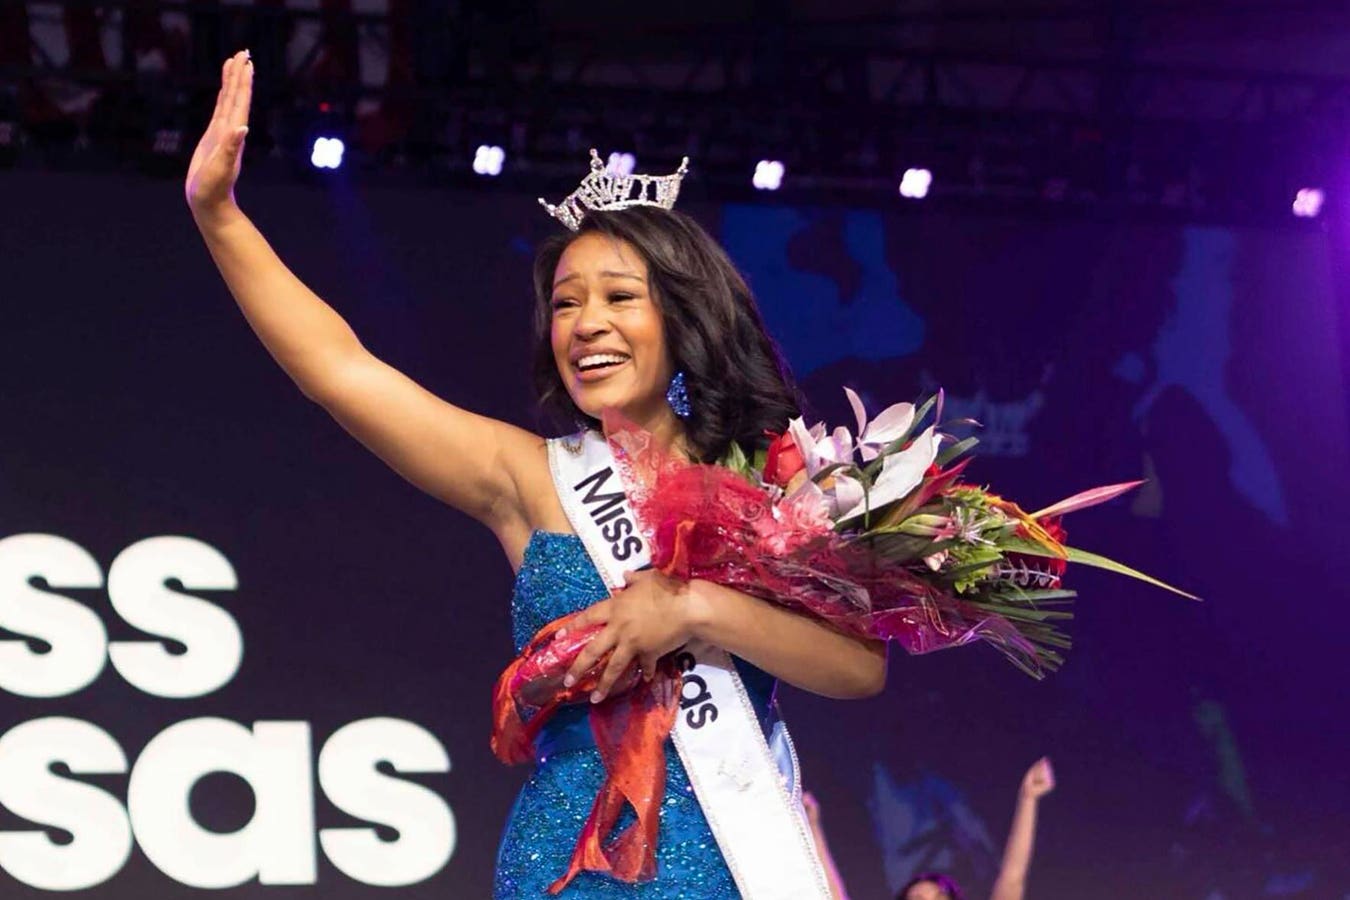 Miss Kansas’ Fearless Stand Inspires Dialogue On Domestic Violence